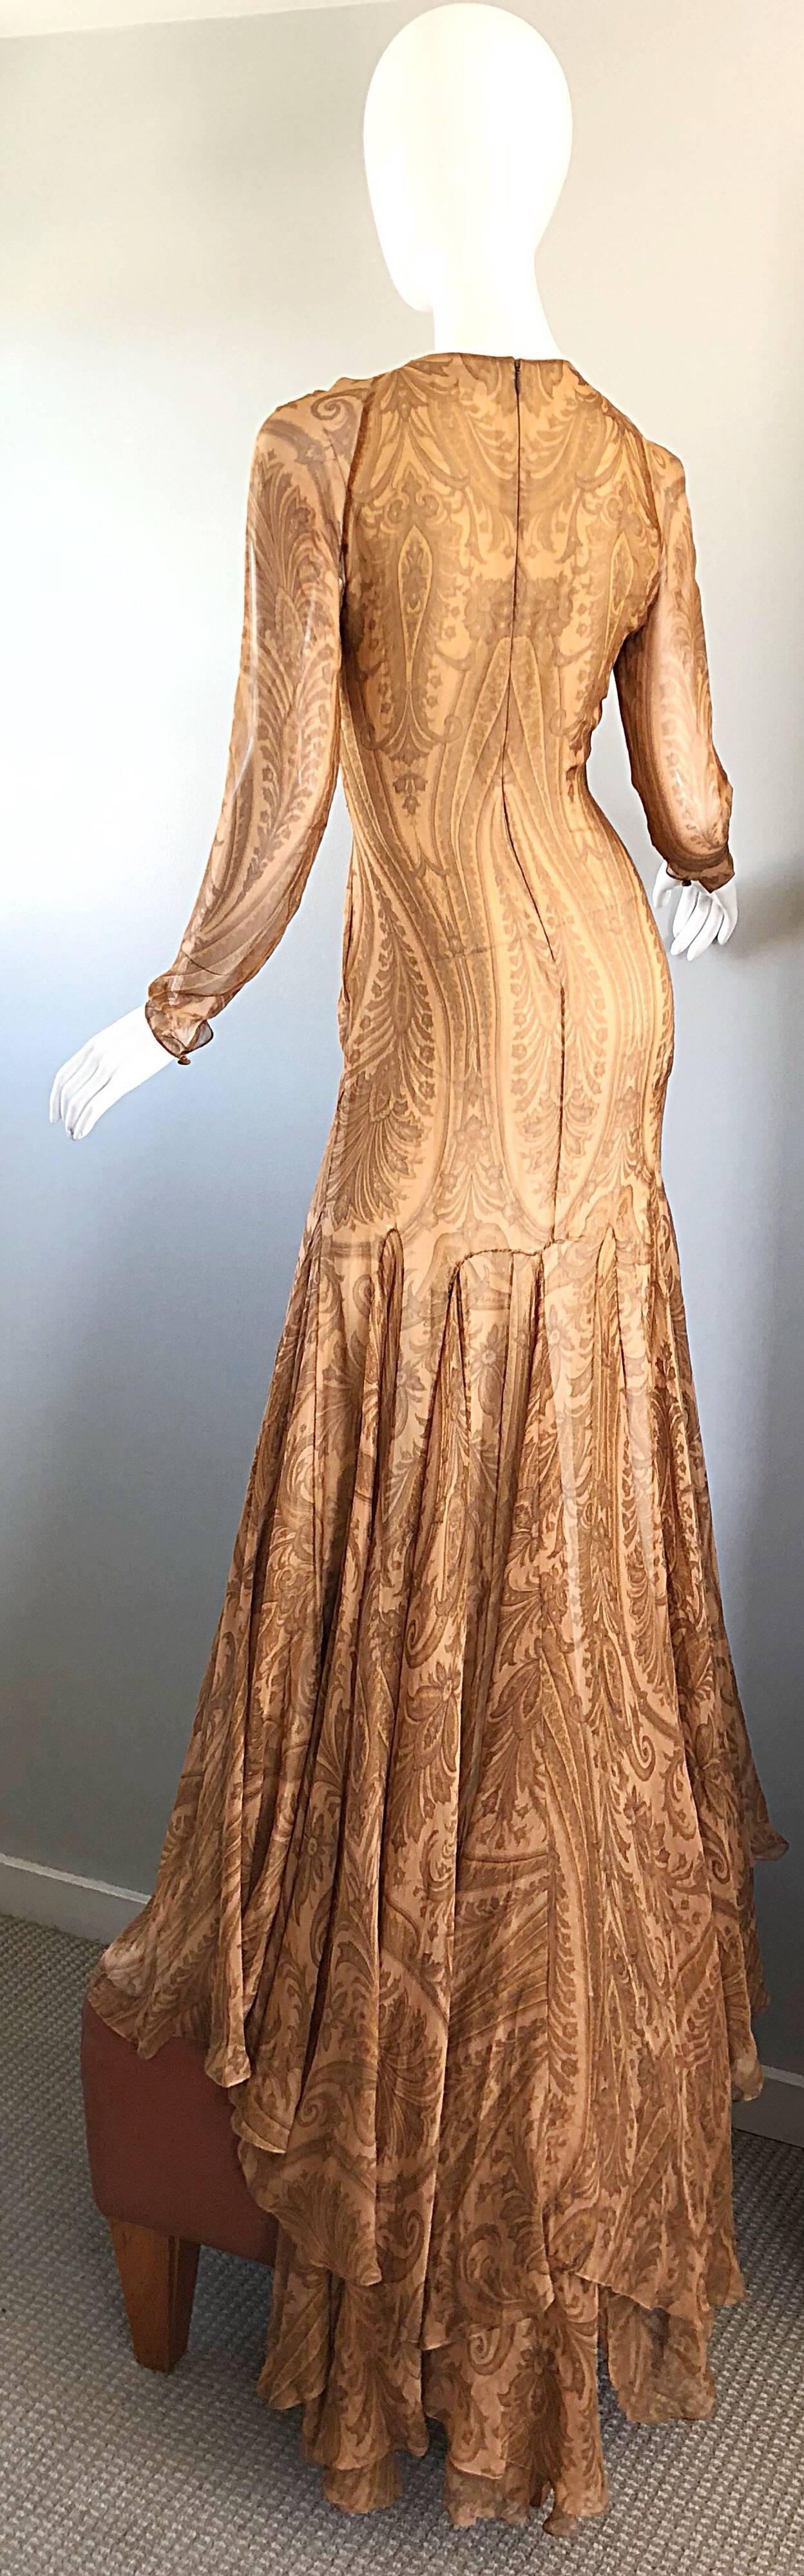 Sensational 1990s Bill Blass Couture Nude Silk Chiffon Paisley Vintage 90s Gown  In Excellent Condition For Sale In San Diego, CA